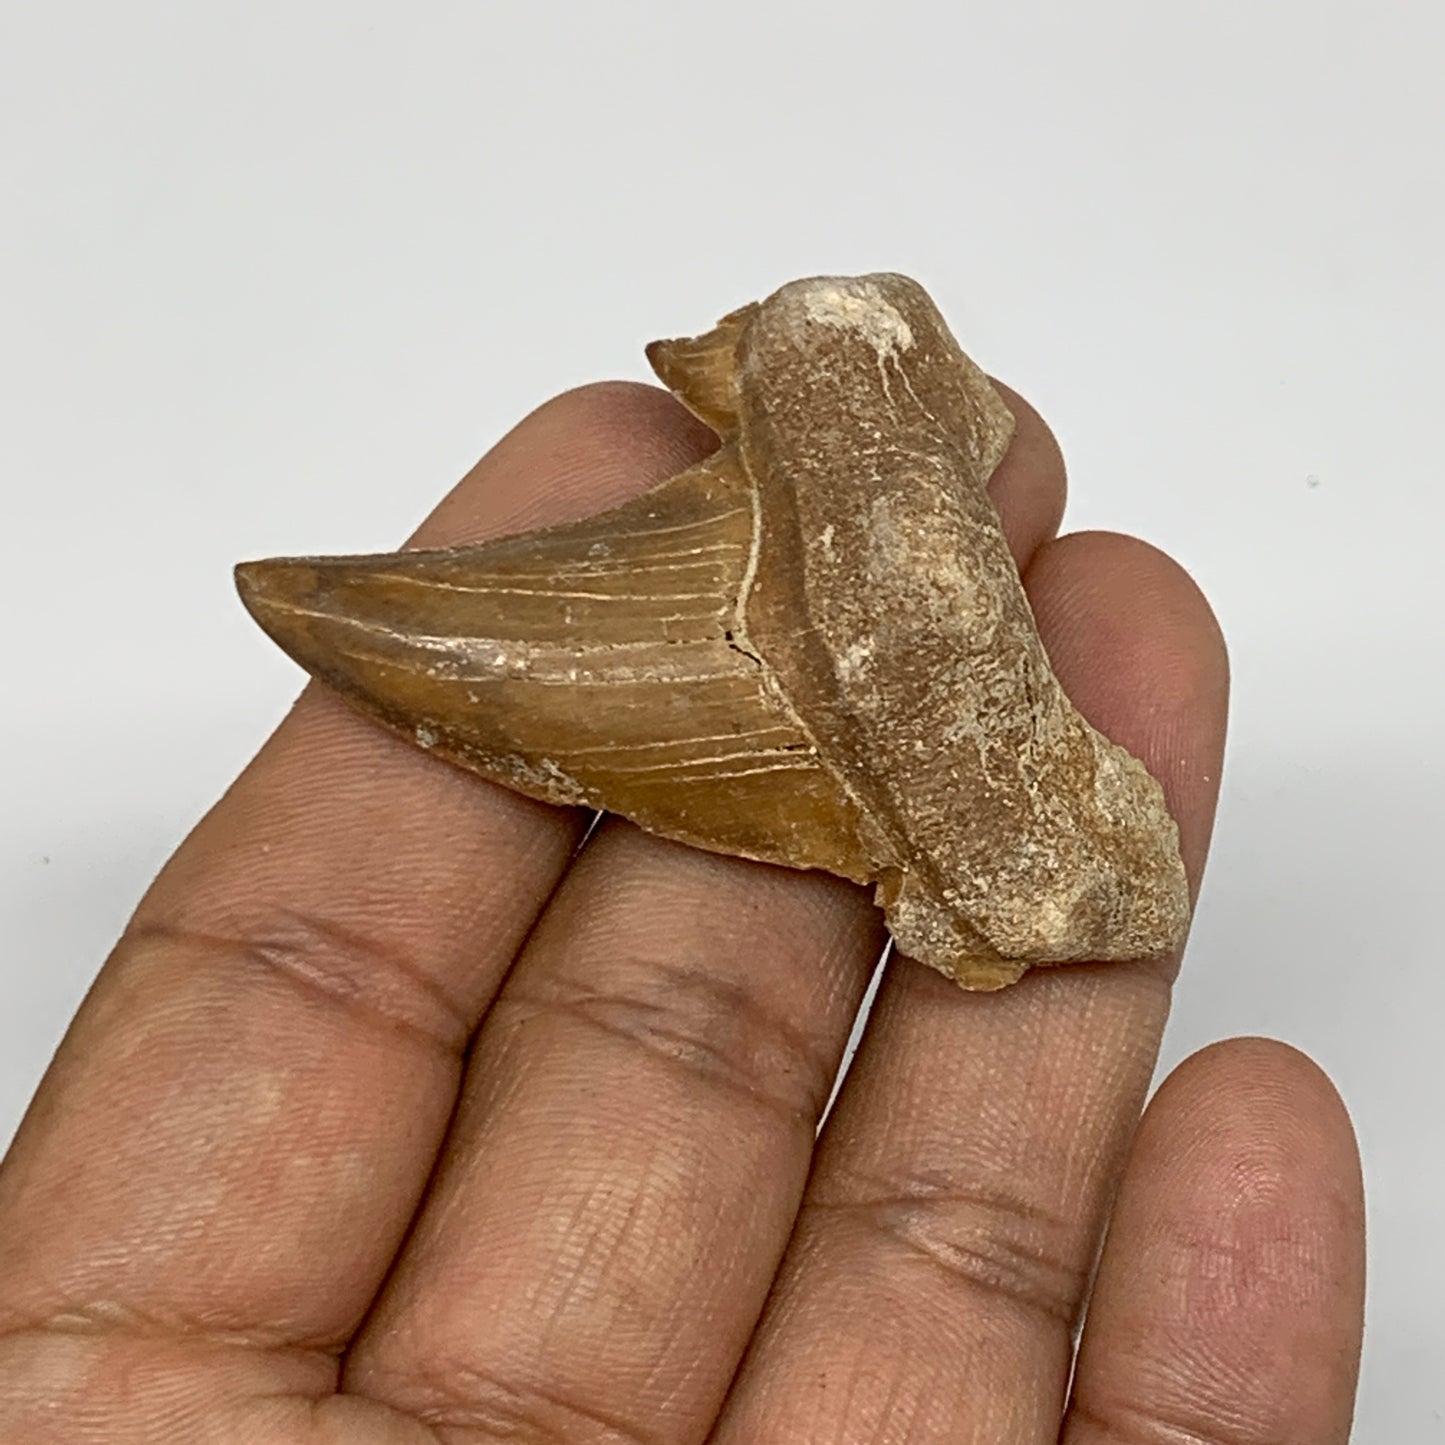 17.8g, 1.7"X 1.6"x 0.6" Natural Fossils Fish Shark Tooth @Morocco, B12663